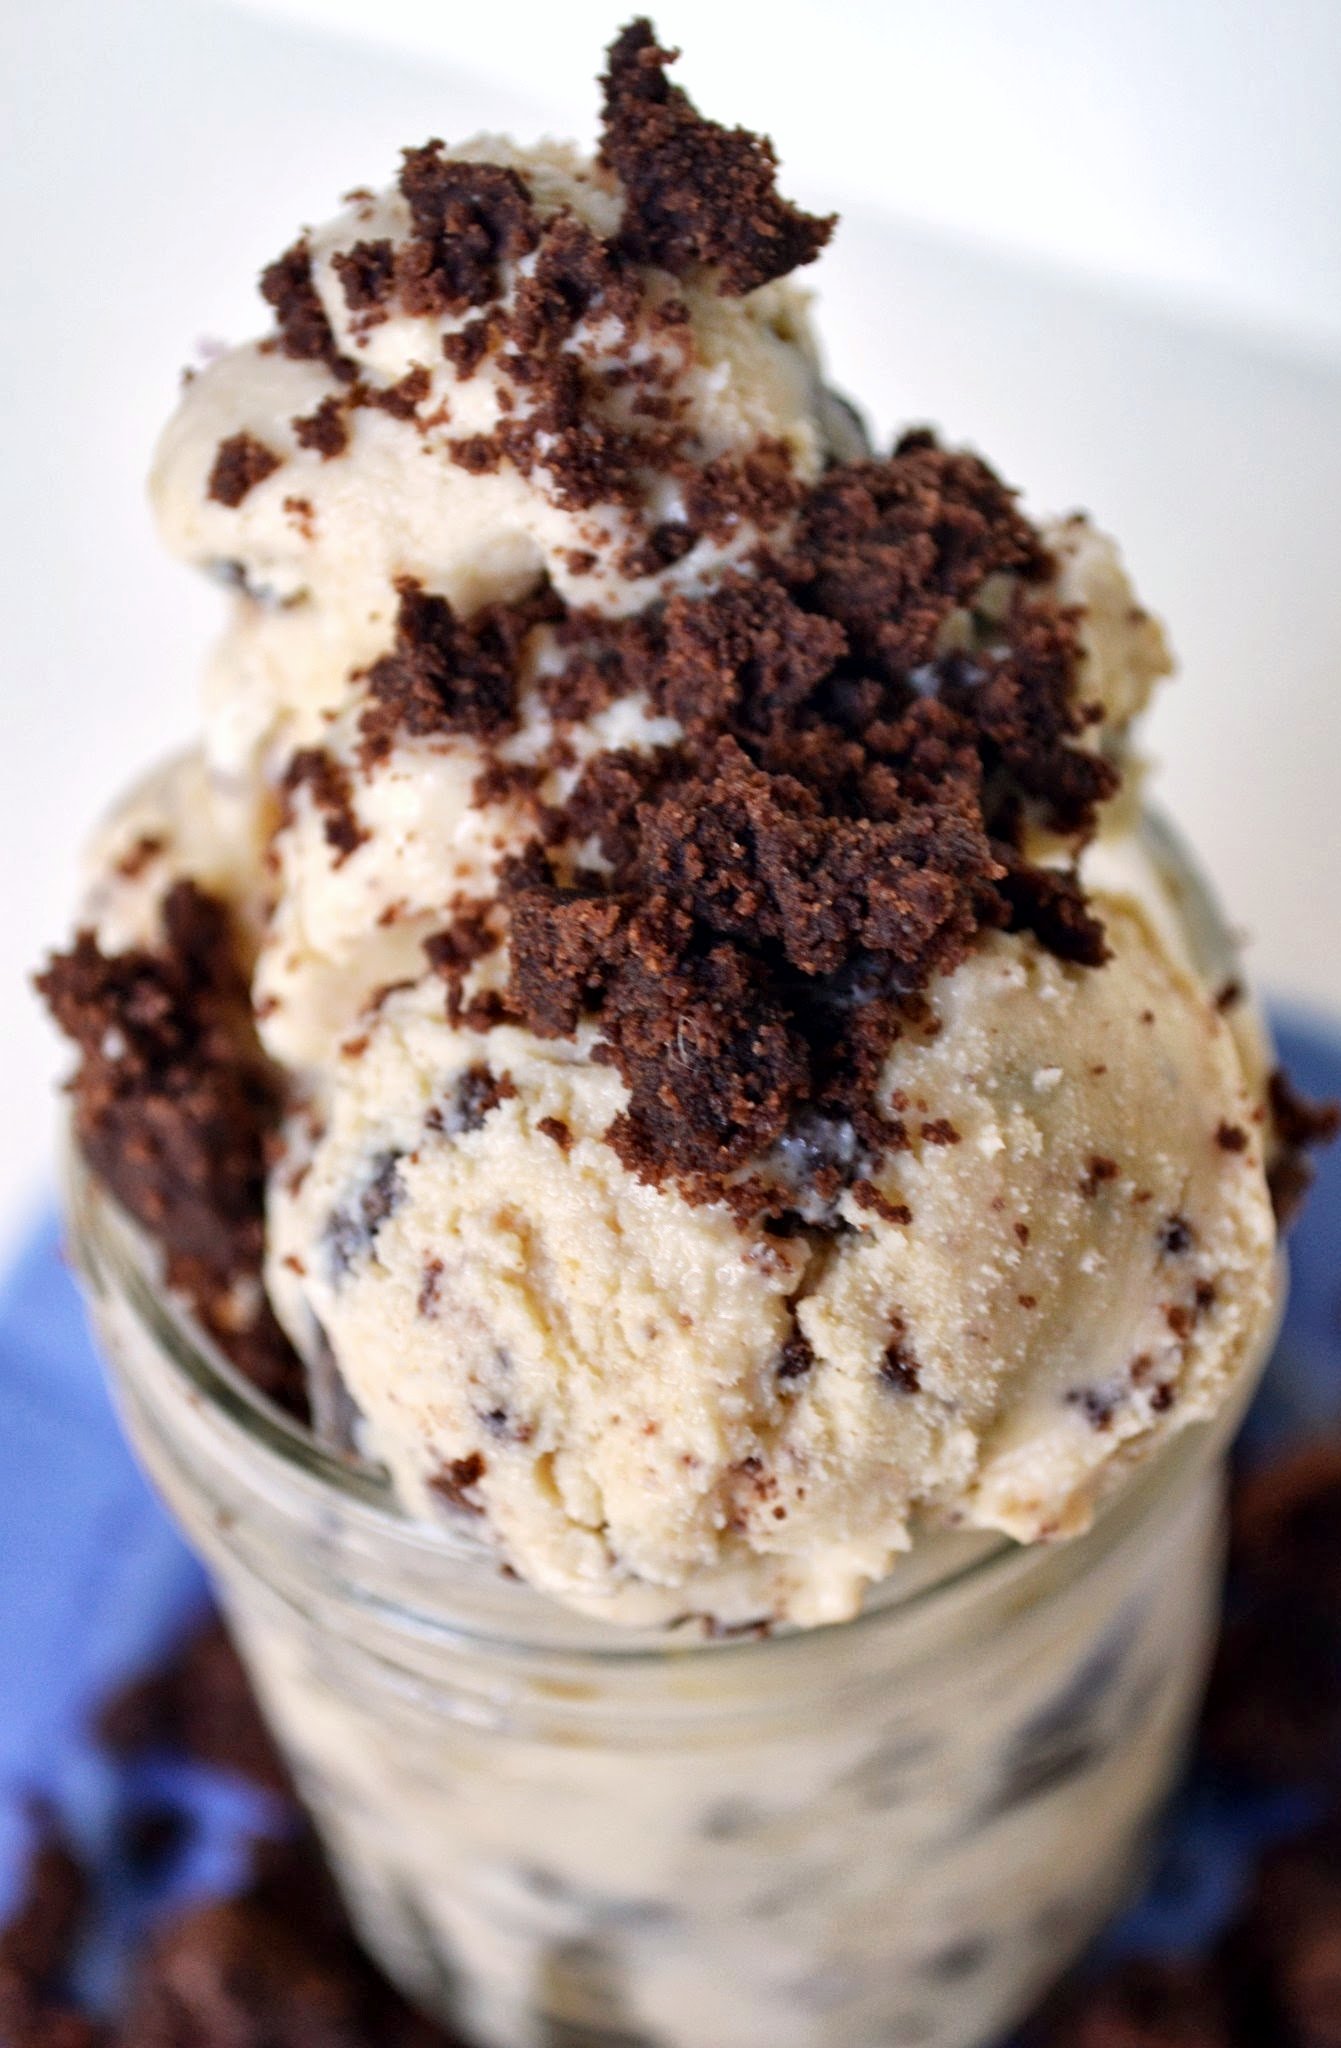 three chocolate cookies and cream dessert in a glass with milk